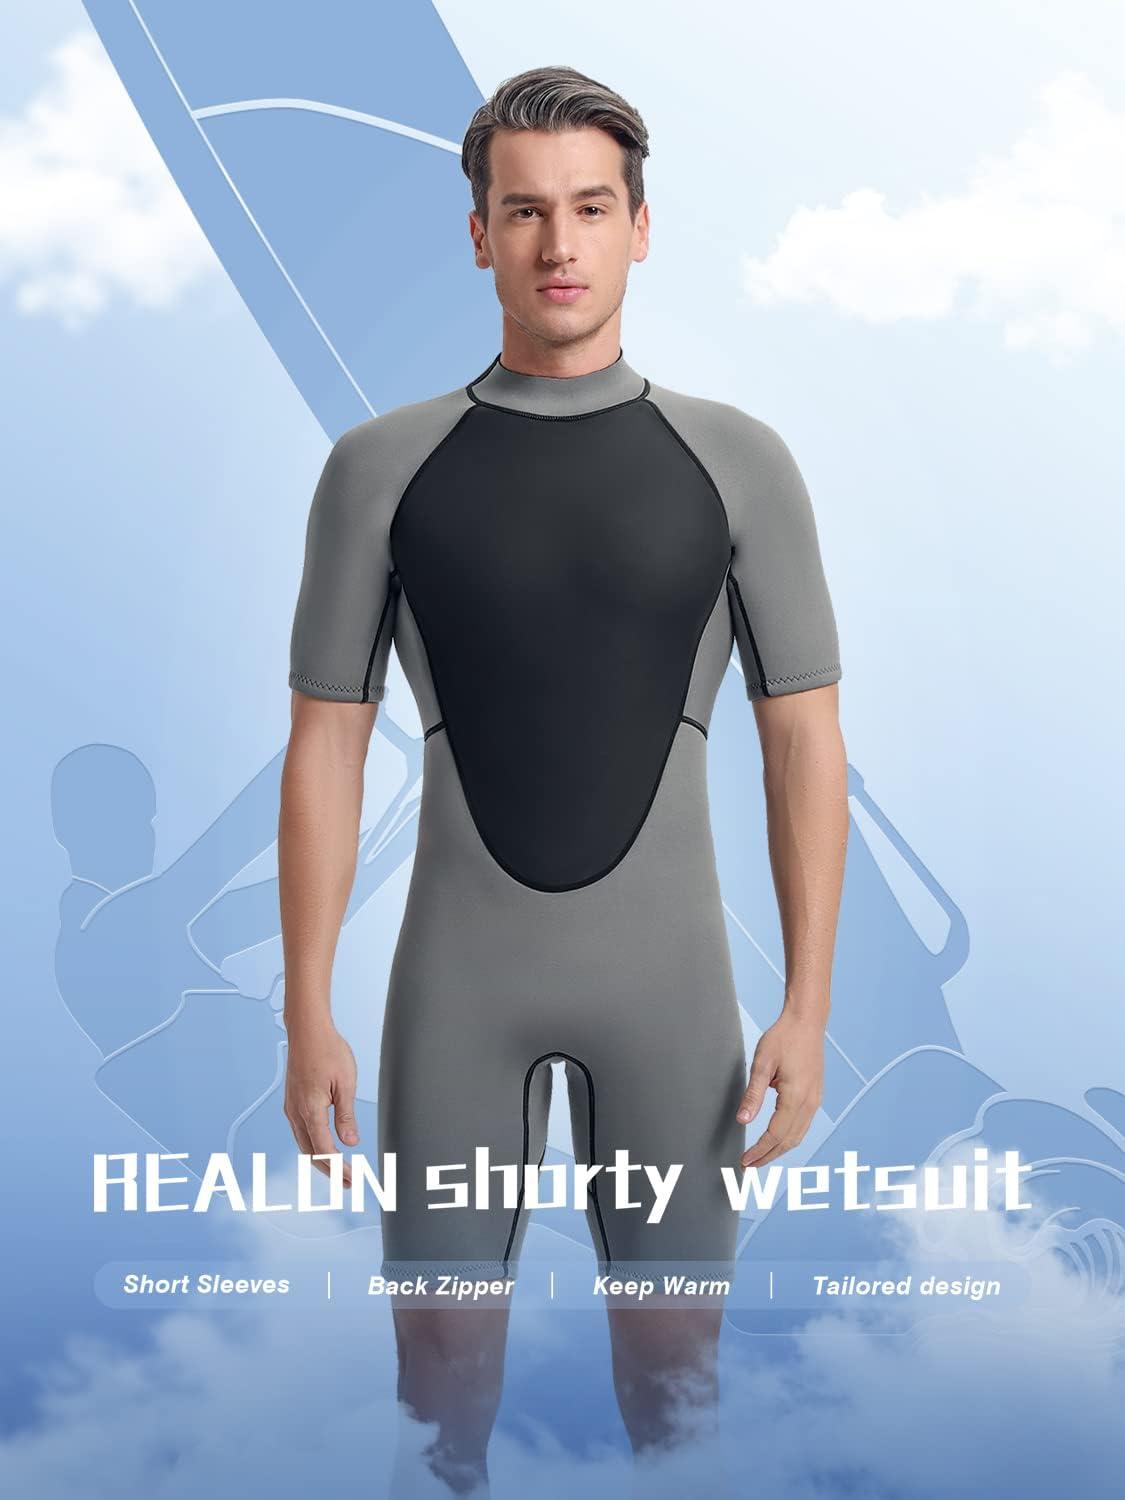 REALON Shorty Wetsuit Women and Men 3mm, 2mm Short Sleeves Neoprene Surfing  Wet Suits, Adult Shortie for Snorkeling, Kayaking, Boarding, Swimming 3mm  Shorty Grey Medium